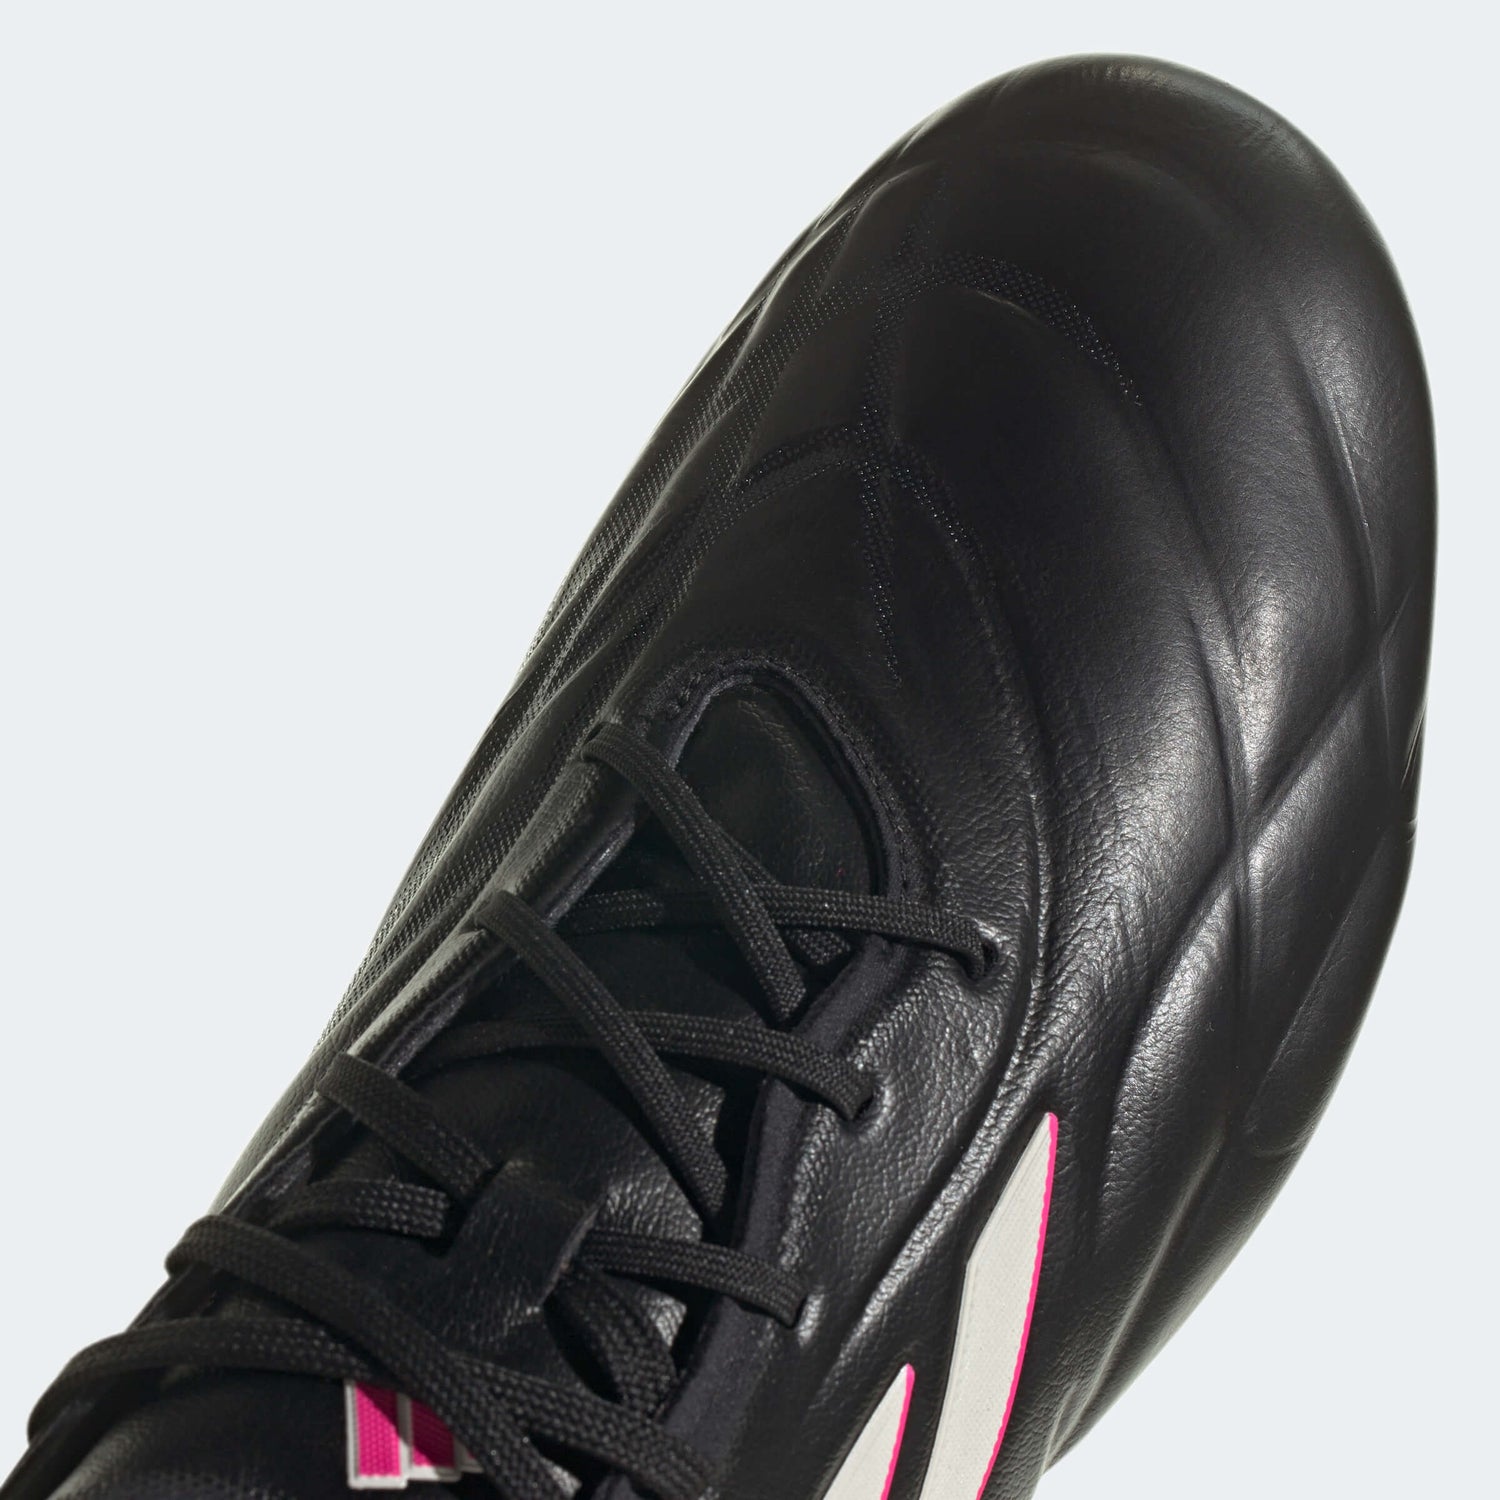 adidas Copa Pure.1 FG - Own Your Football Pack (SP23) (Detail 2)